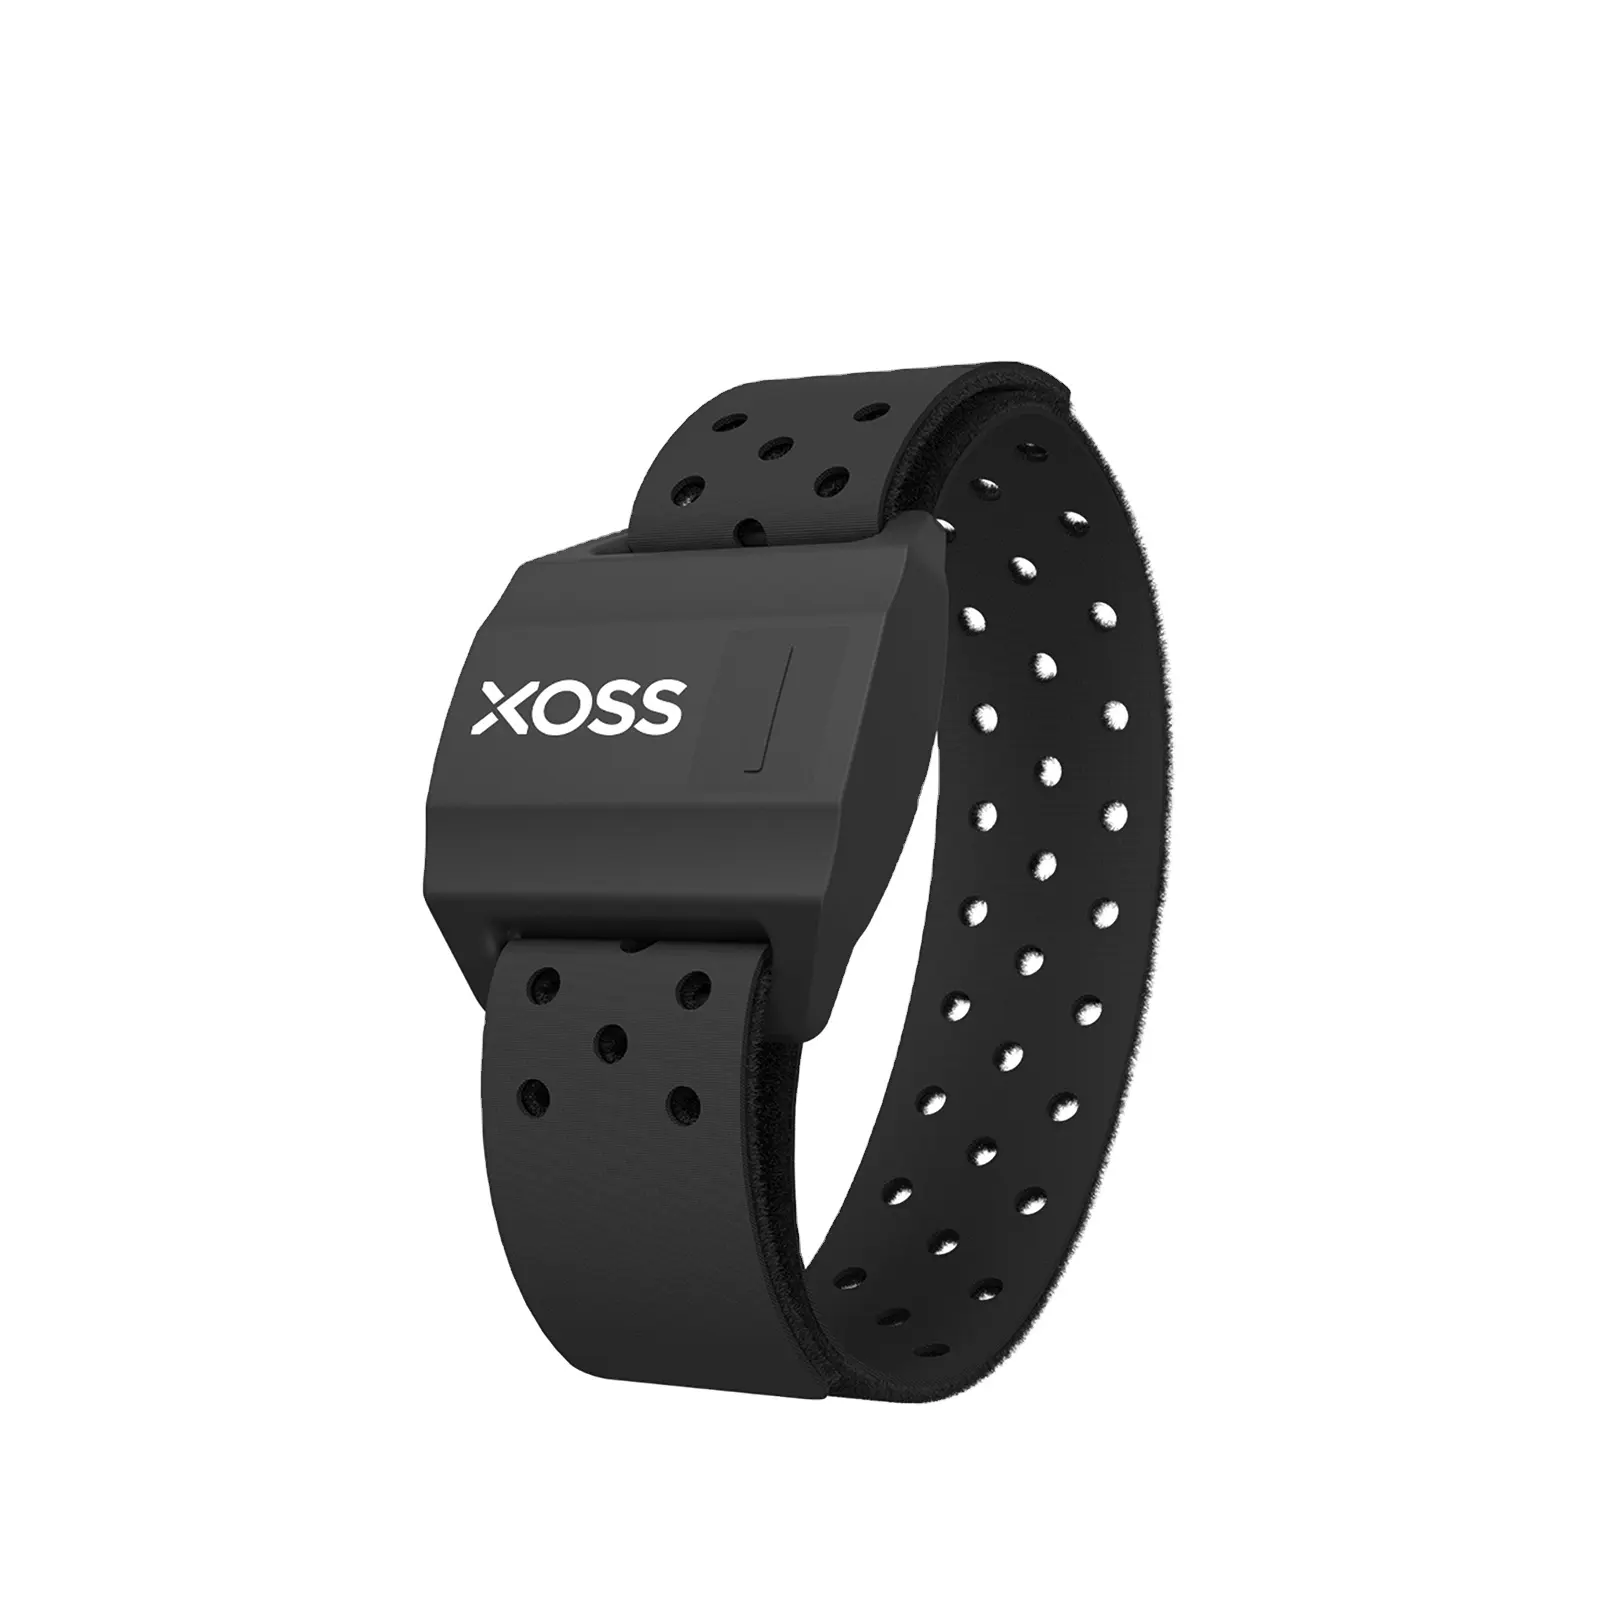 XOSS Optical Armband Heart Rate Monitor Bluetooth 4.0& ANT+ Wireless Heart Rate Health Accessories Fitness Tracker (Armband)